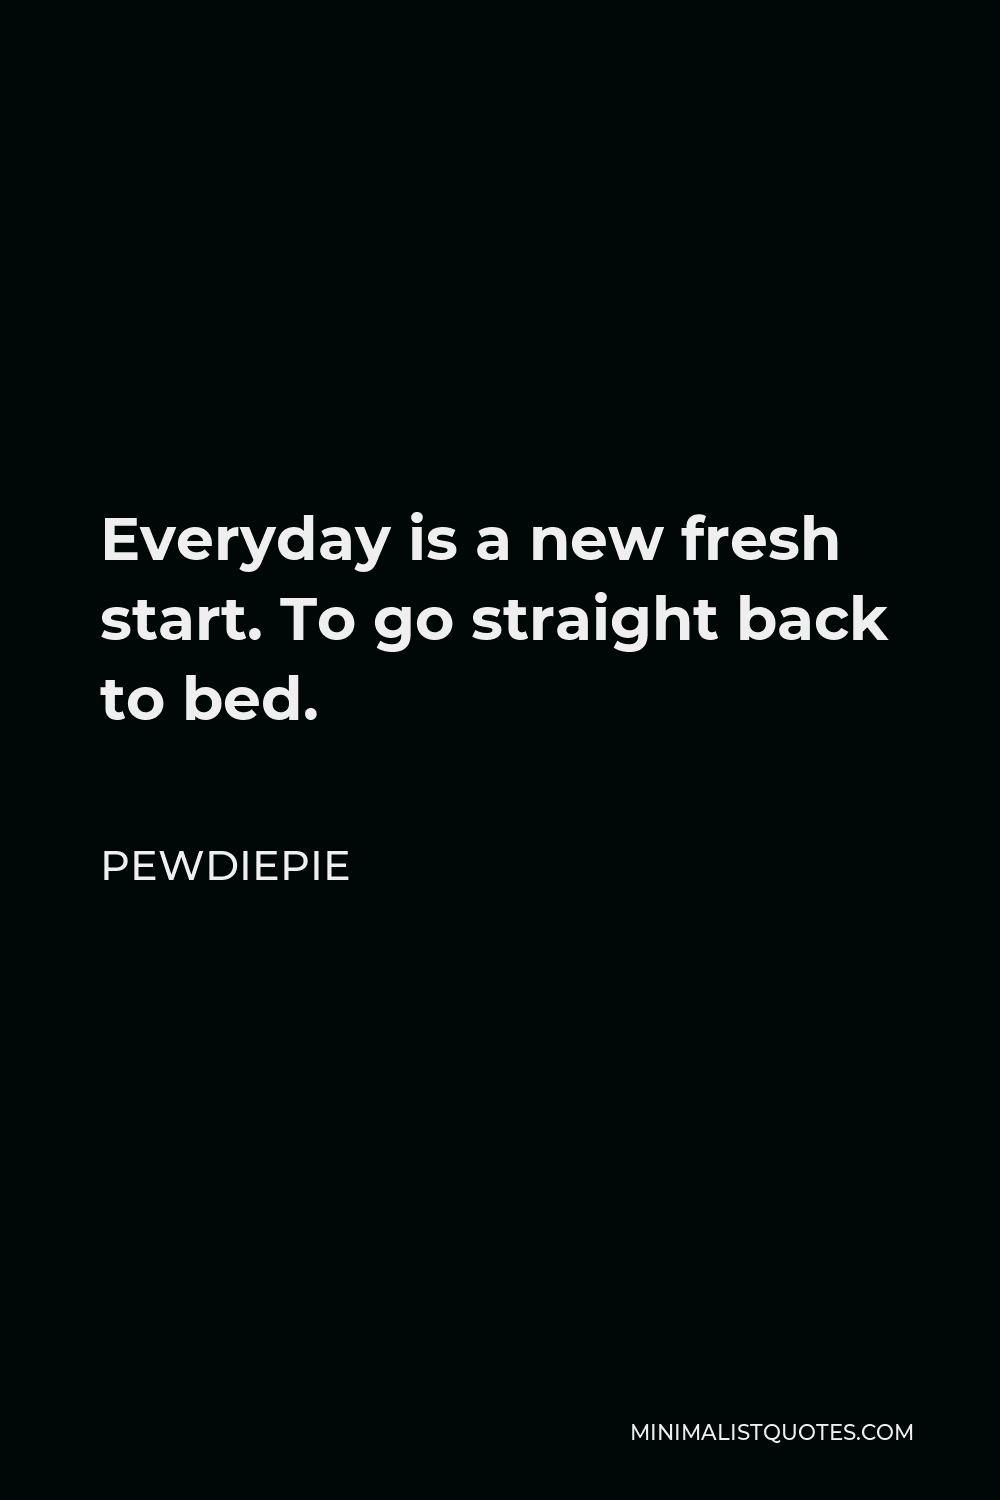 PewDiePie Quote - Everyday is a new fresh start. To go straight back to bed.